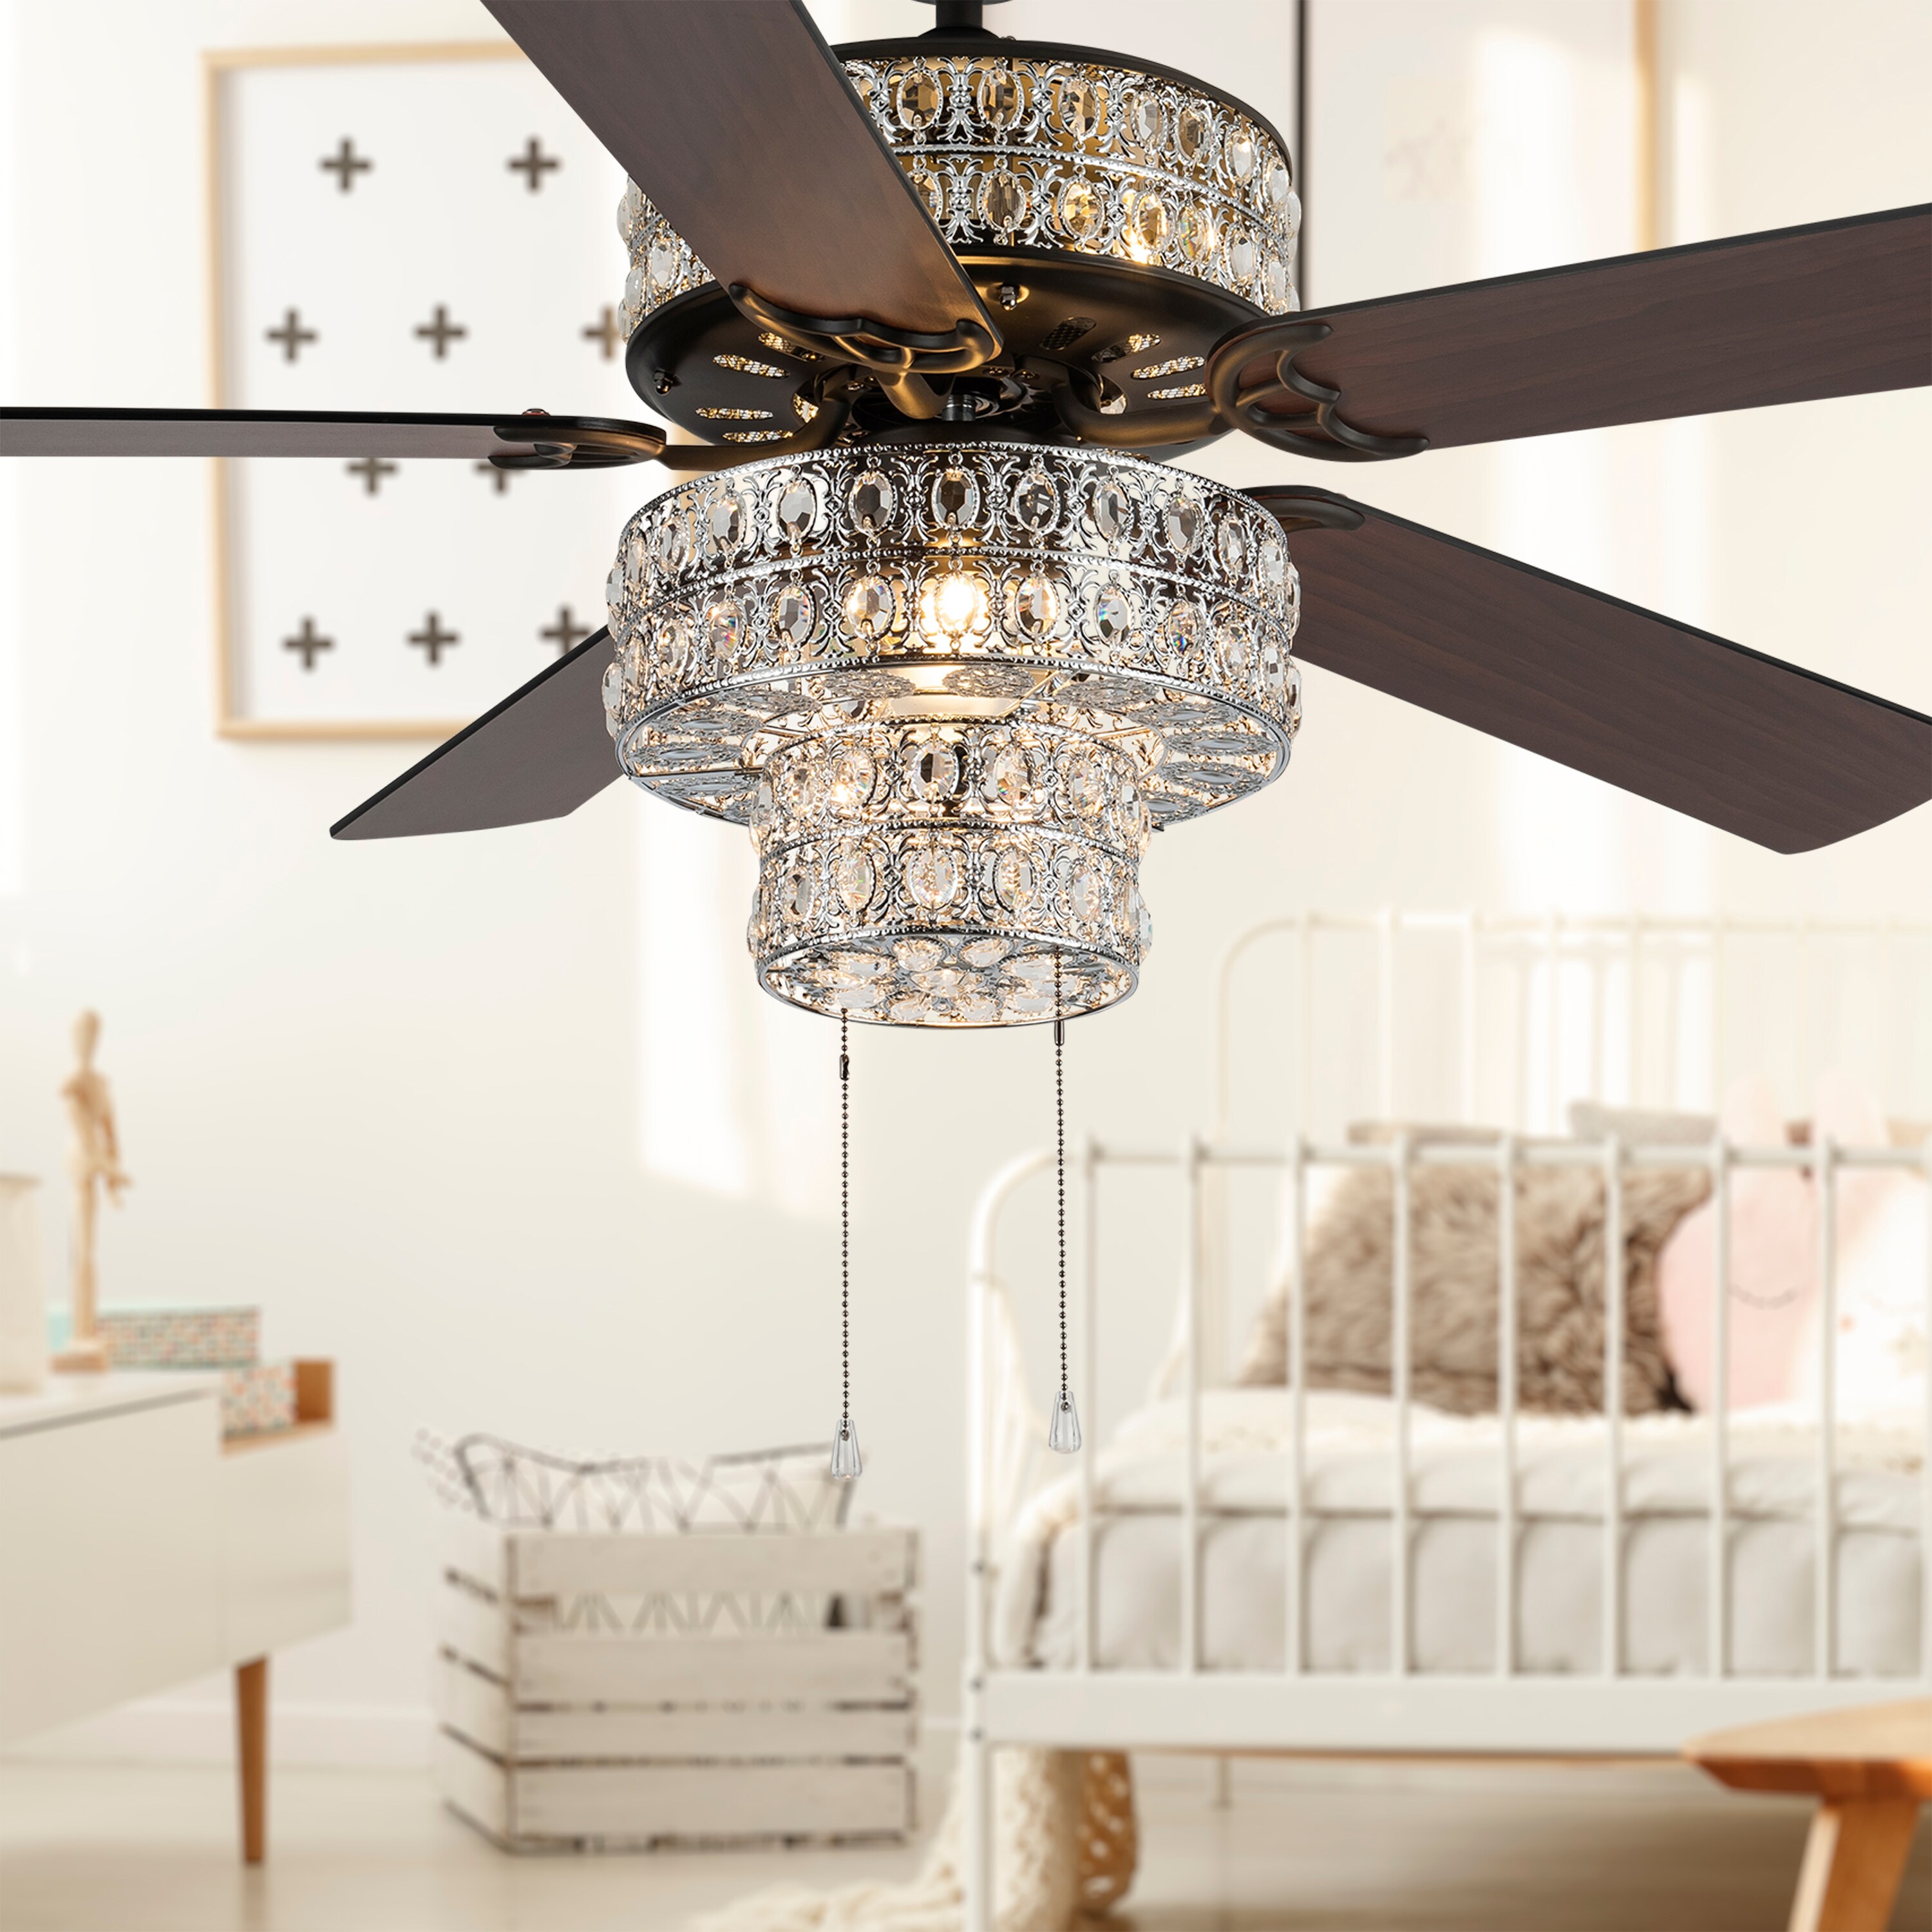 River of Goods 52" Silver Punched Metal & Crystal Ceiling Fan #16555S 